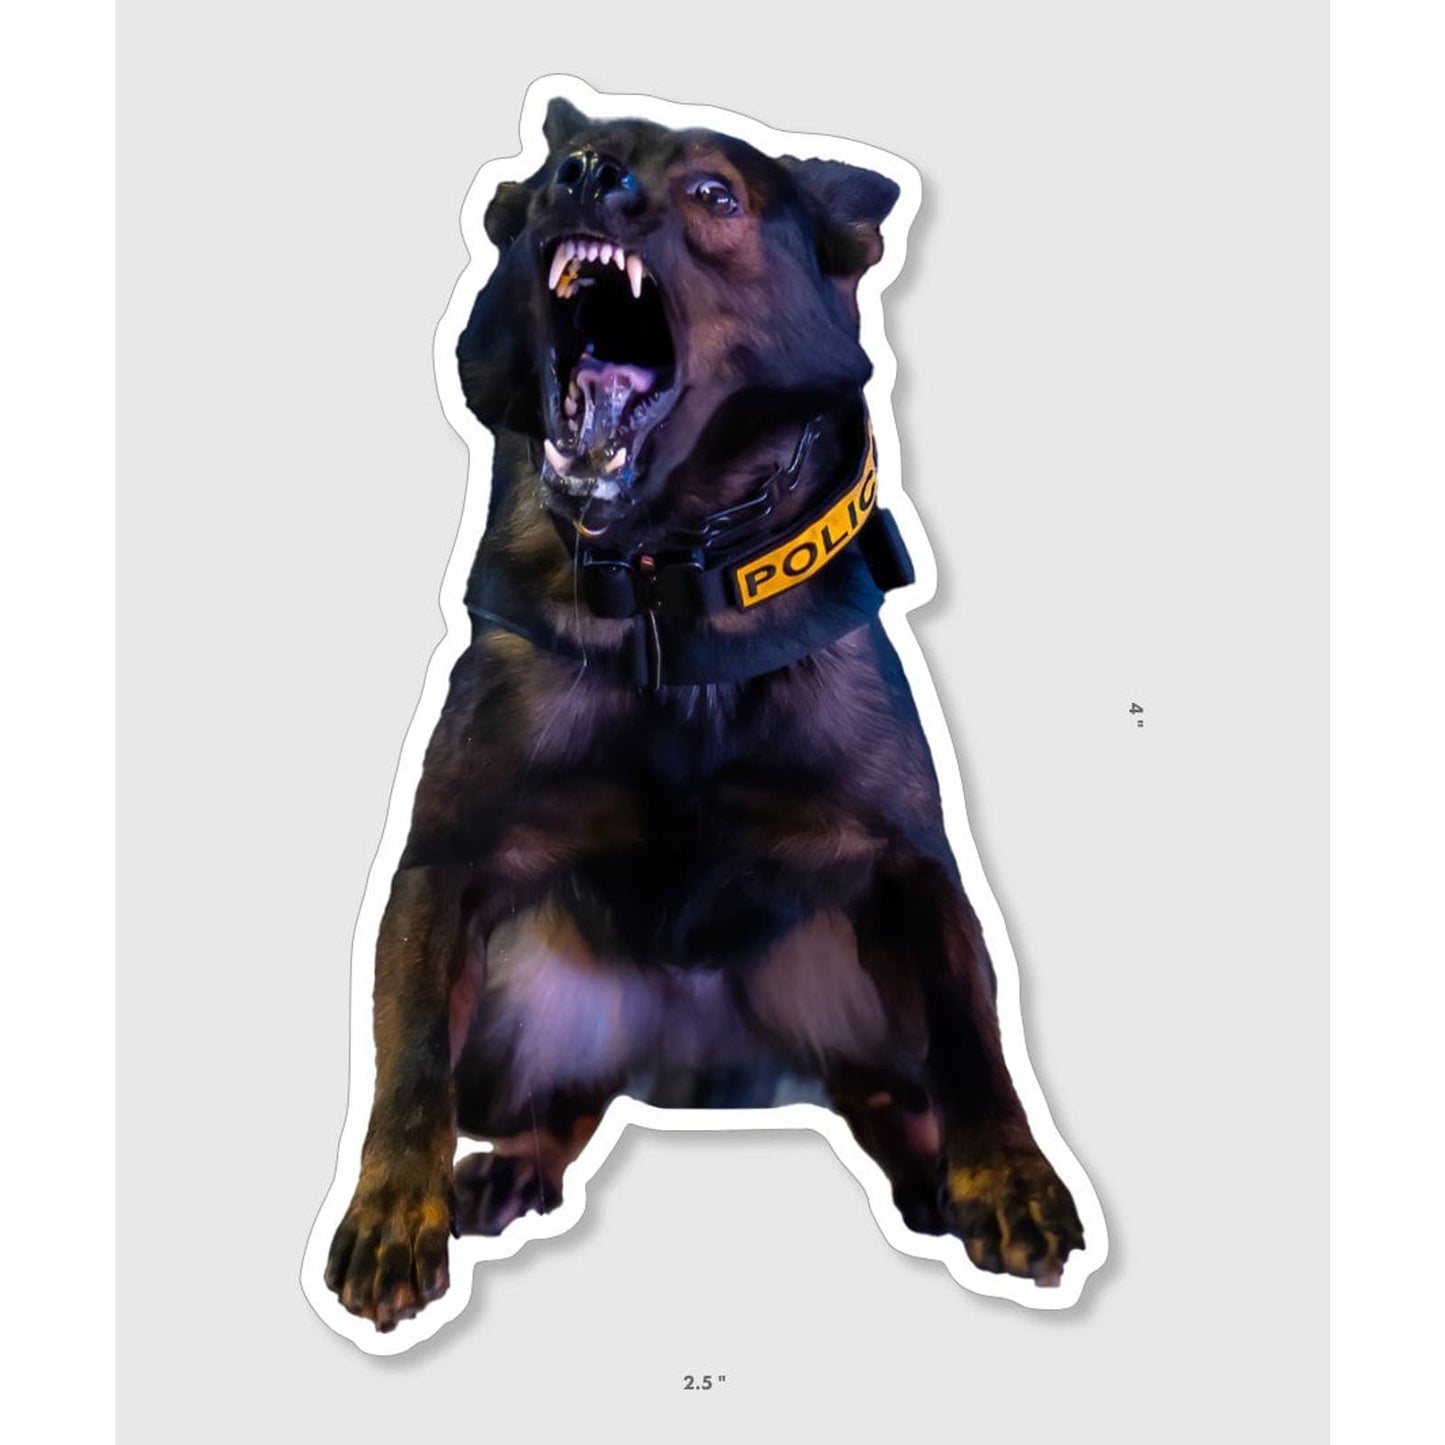 K9 Stickers - Custom K9 Unit Stickers for K9 Unit, SAR, Police Dog, Law Enforcement & Working Dogs